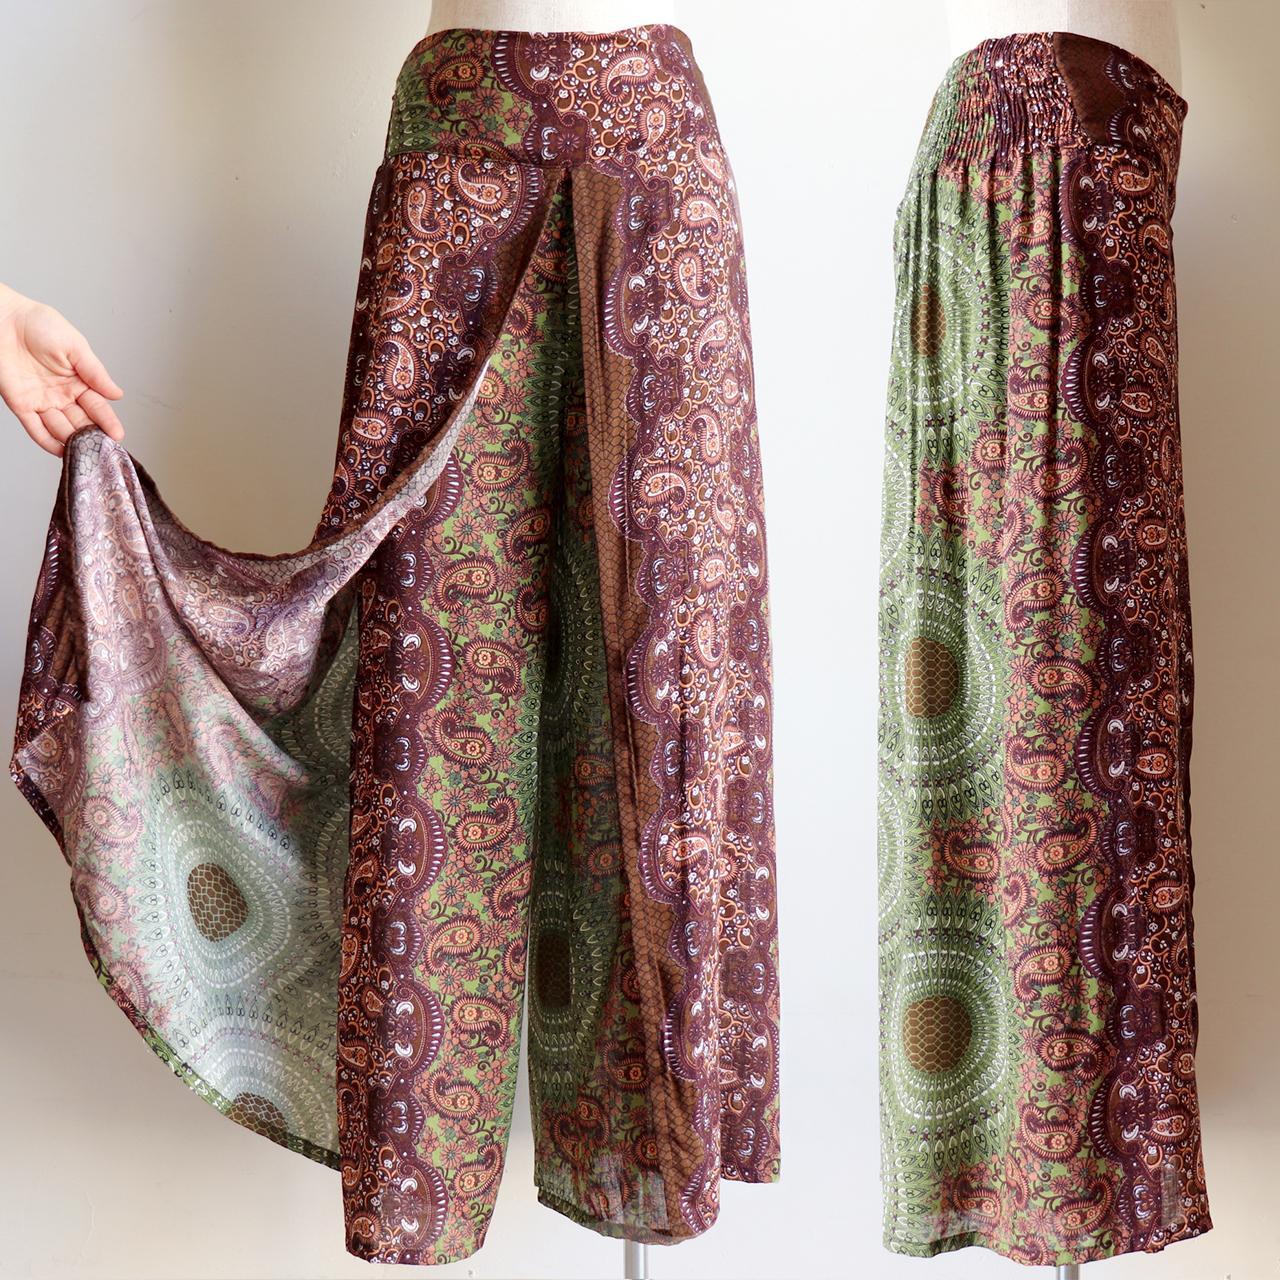 Free Spirit Wrap Pant, classic wide-leg palazzo style in vibrant print